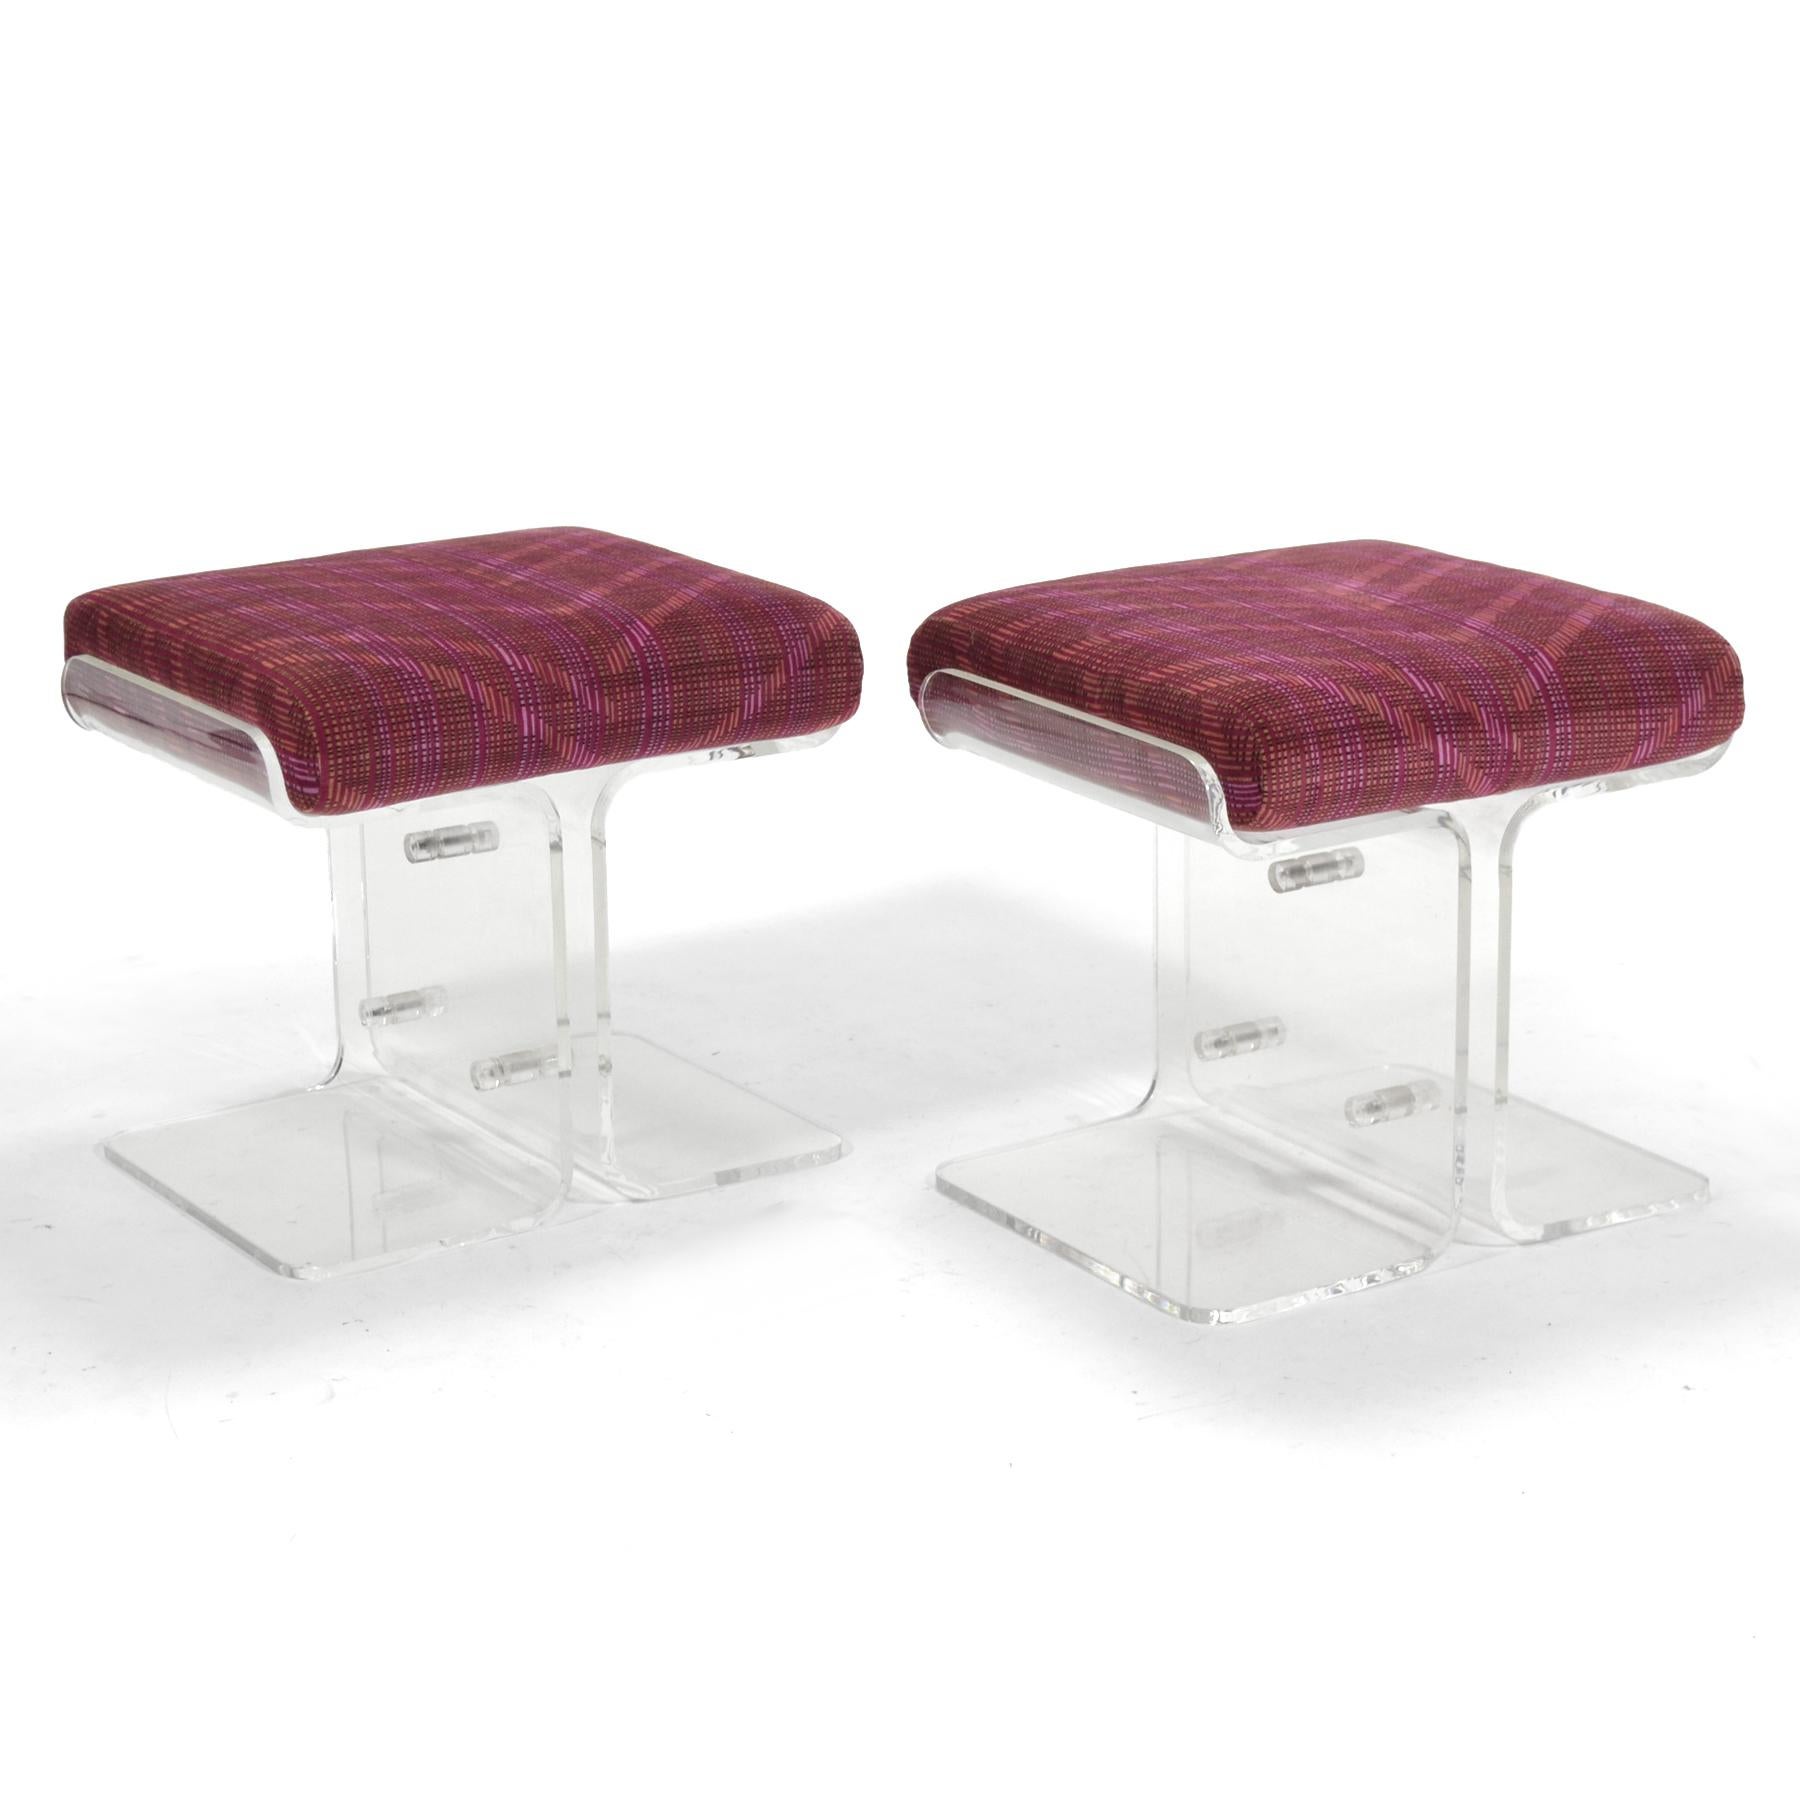 This pair of beautiful stools use clear lucite to great effect. The symetrical bases are fastened in the center and cradle a loose upholstered seat cushion. Dating to the late 1970s, they remain in excellent condition.